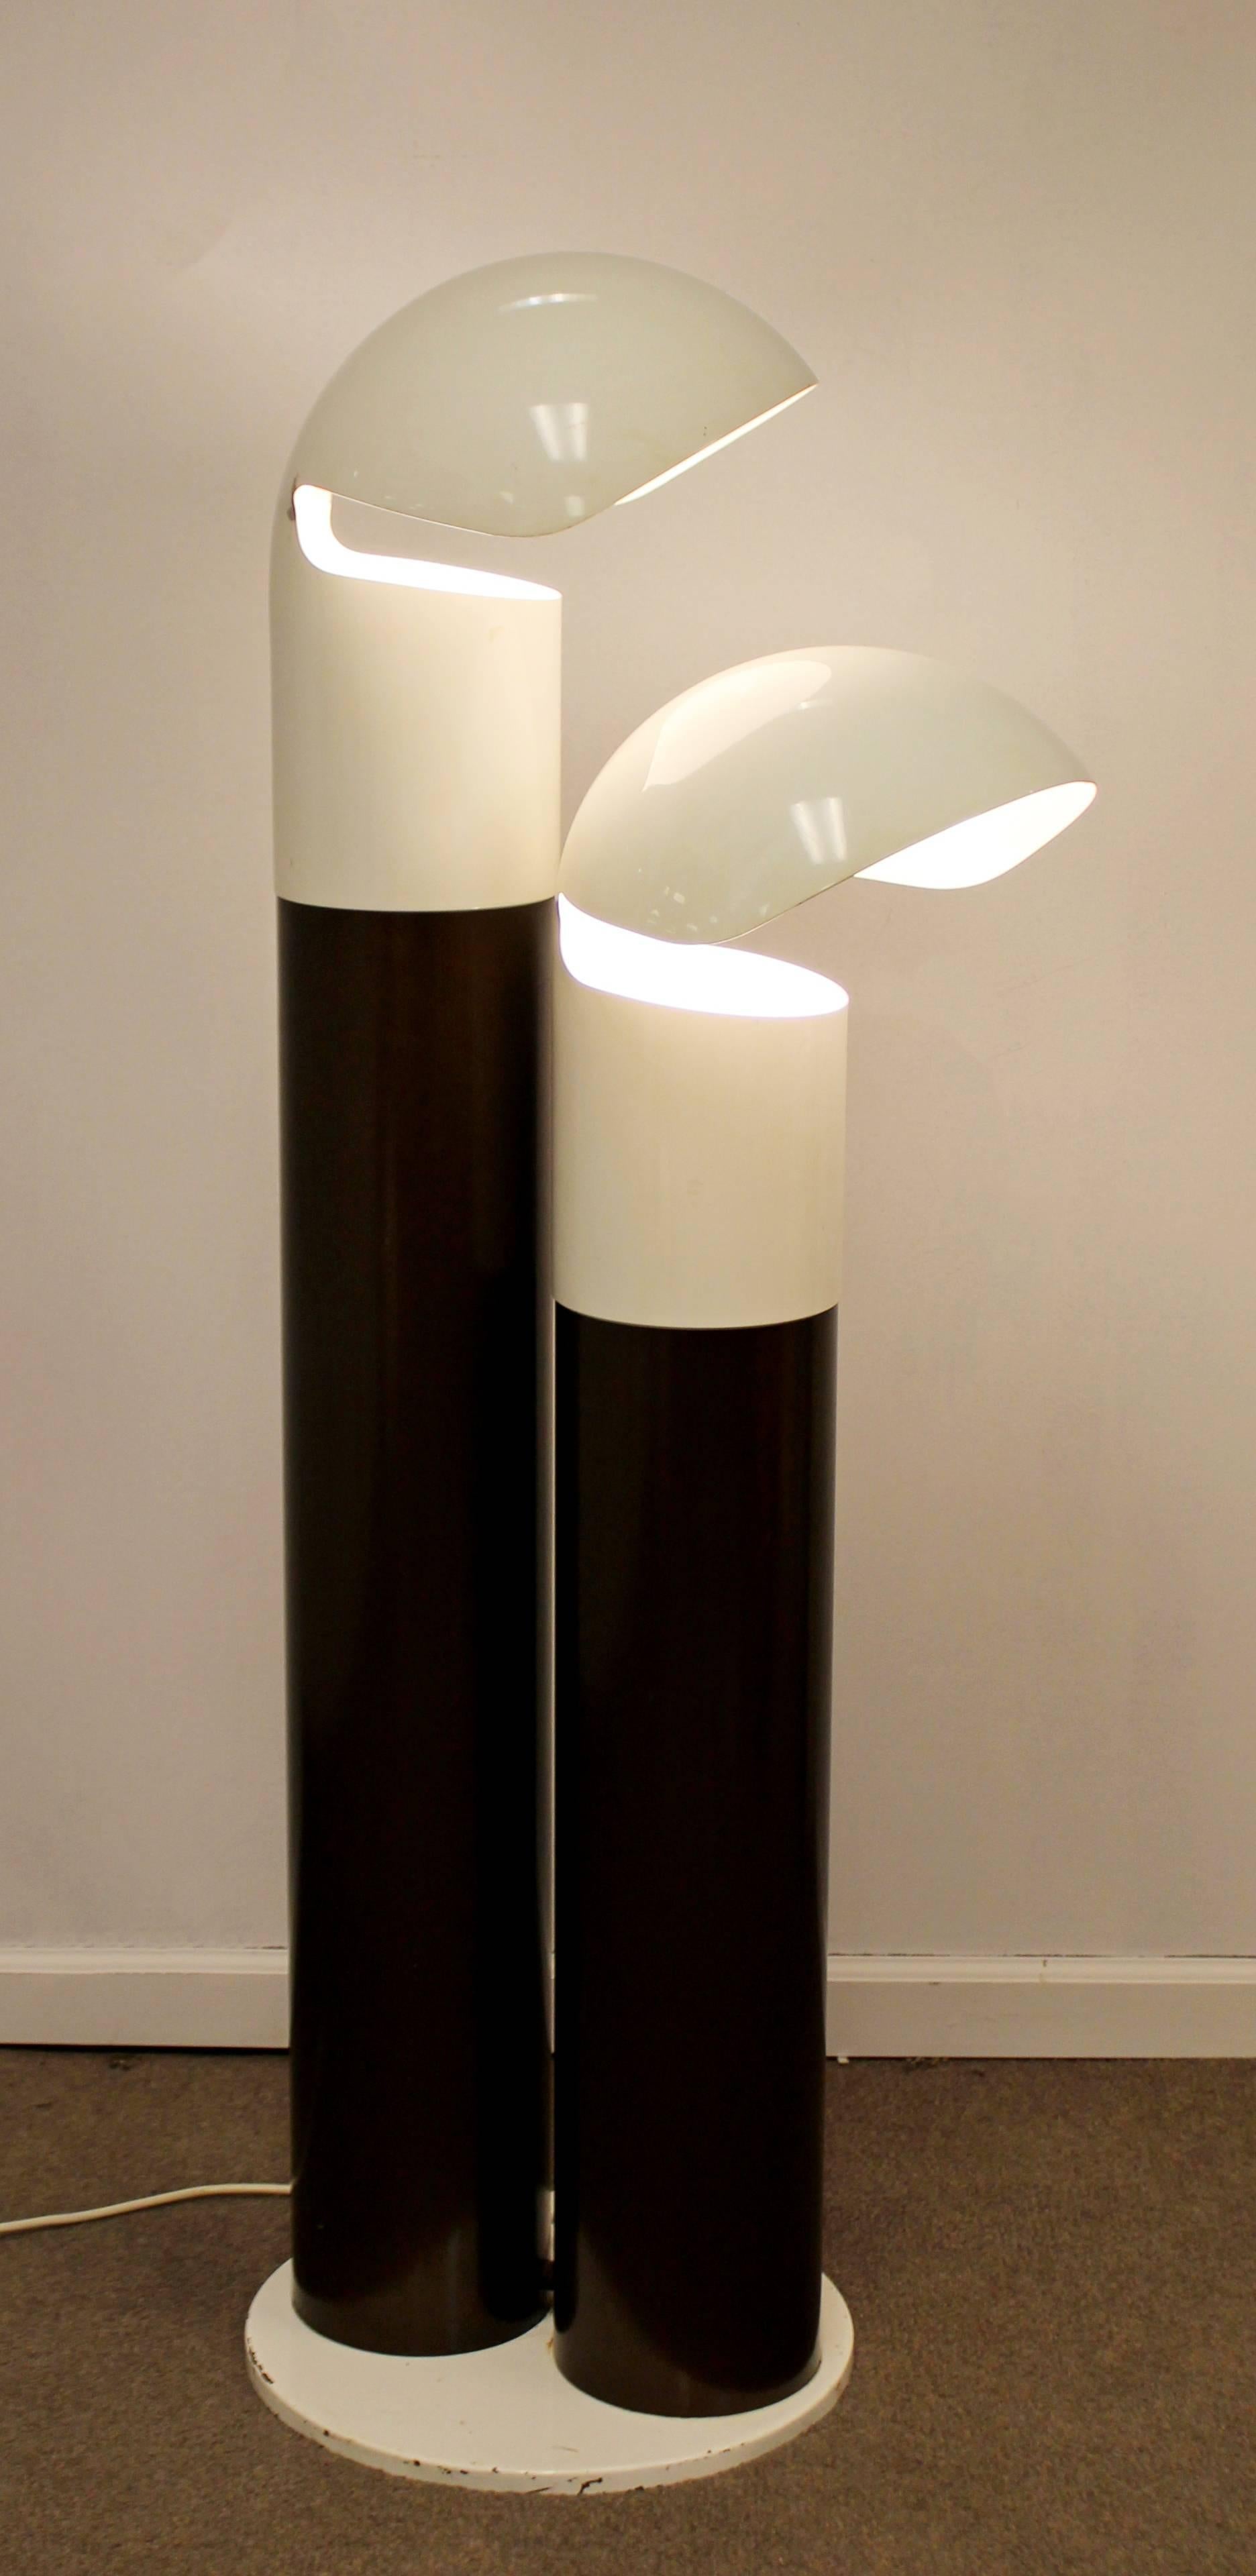 For your consideration is a fabulous, Dual head, tubular metal floor lamp from Italy. Designed by Francesco Buzzi Ceriani, circa 1970s. In very good vintage condition. The dimensions are 16